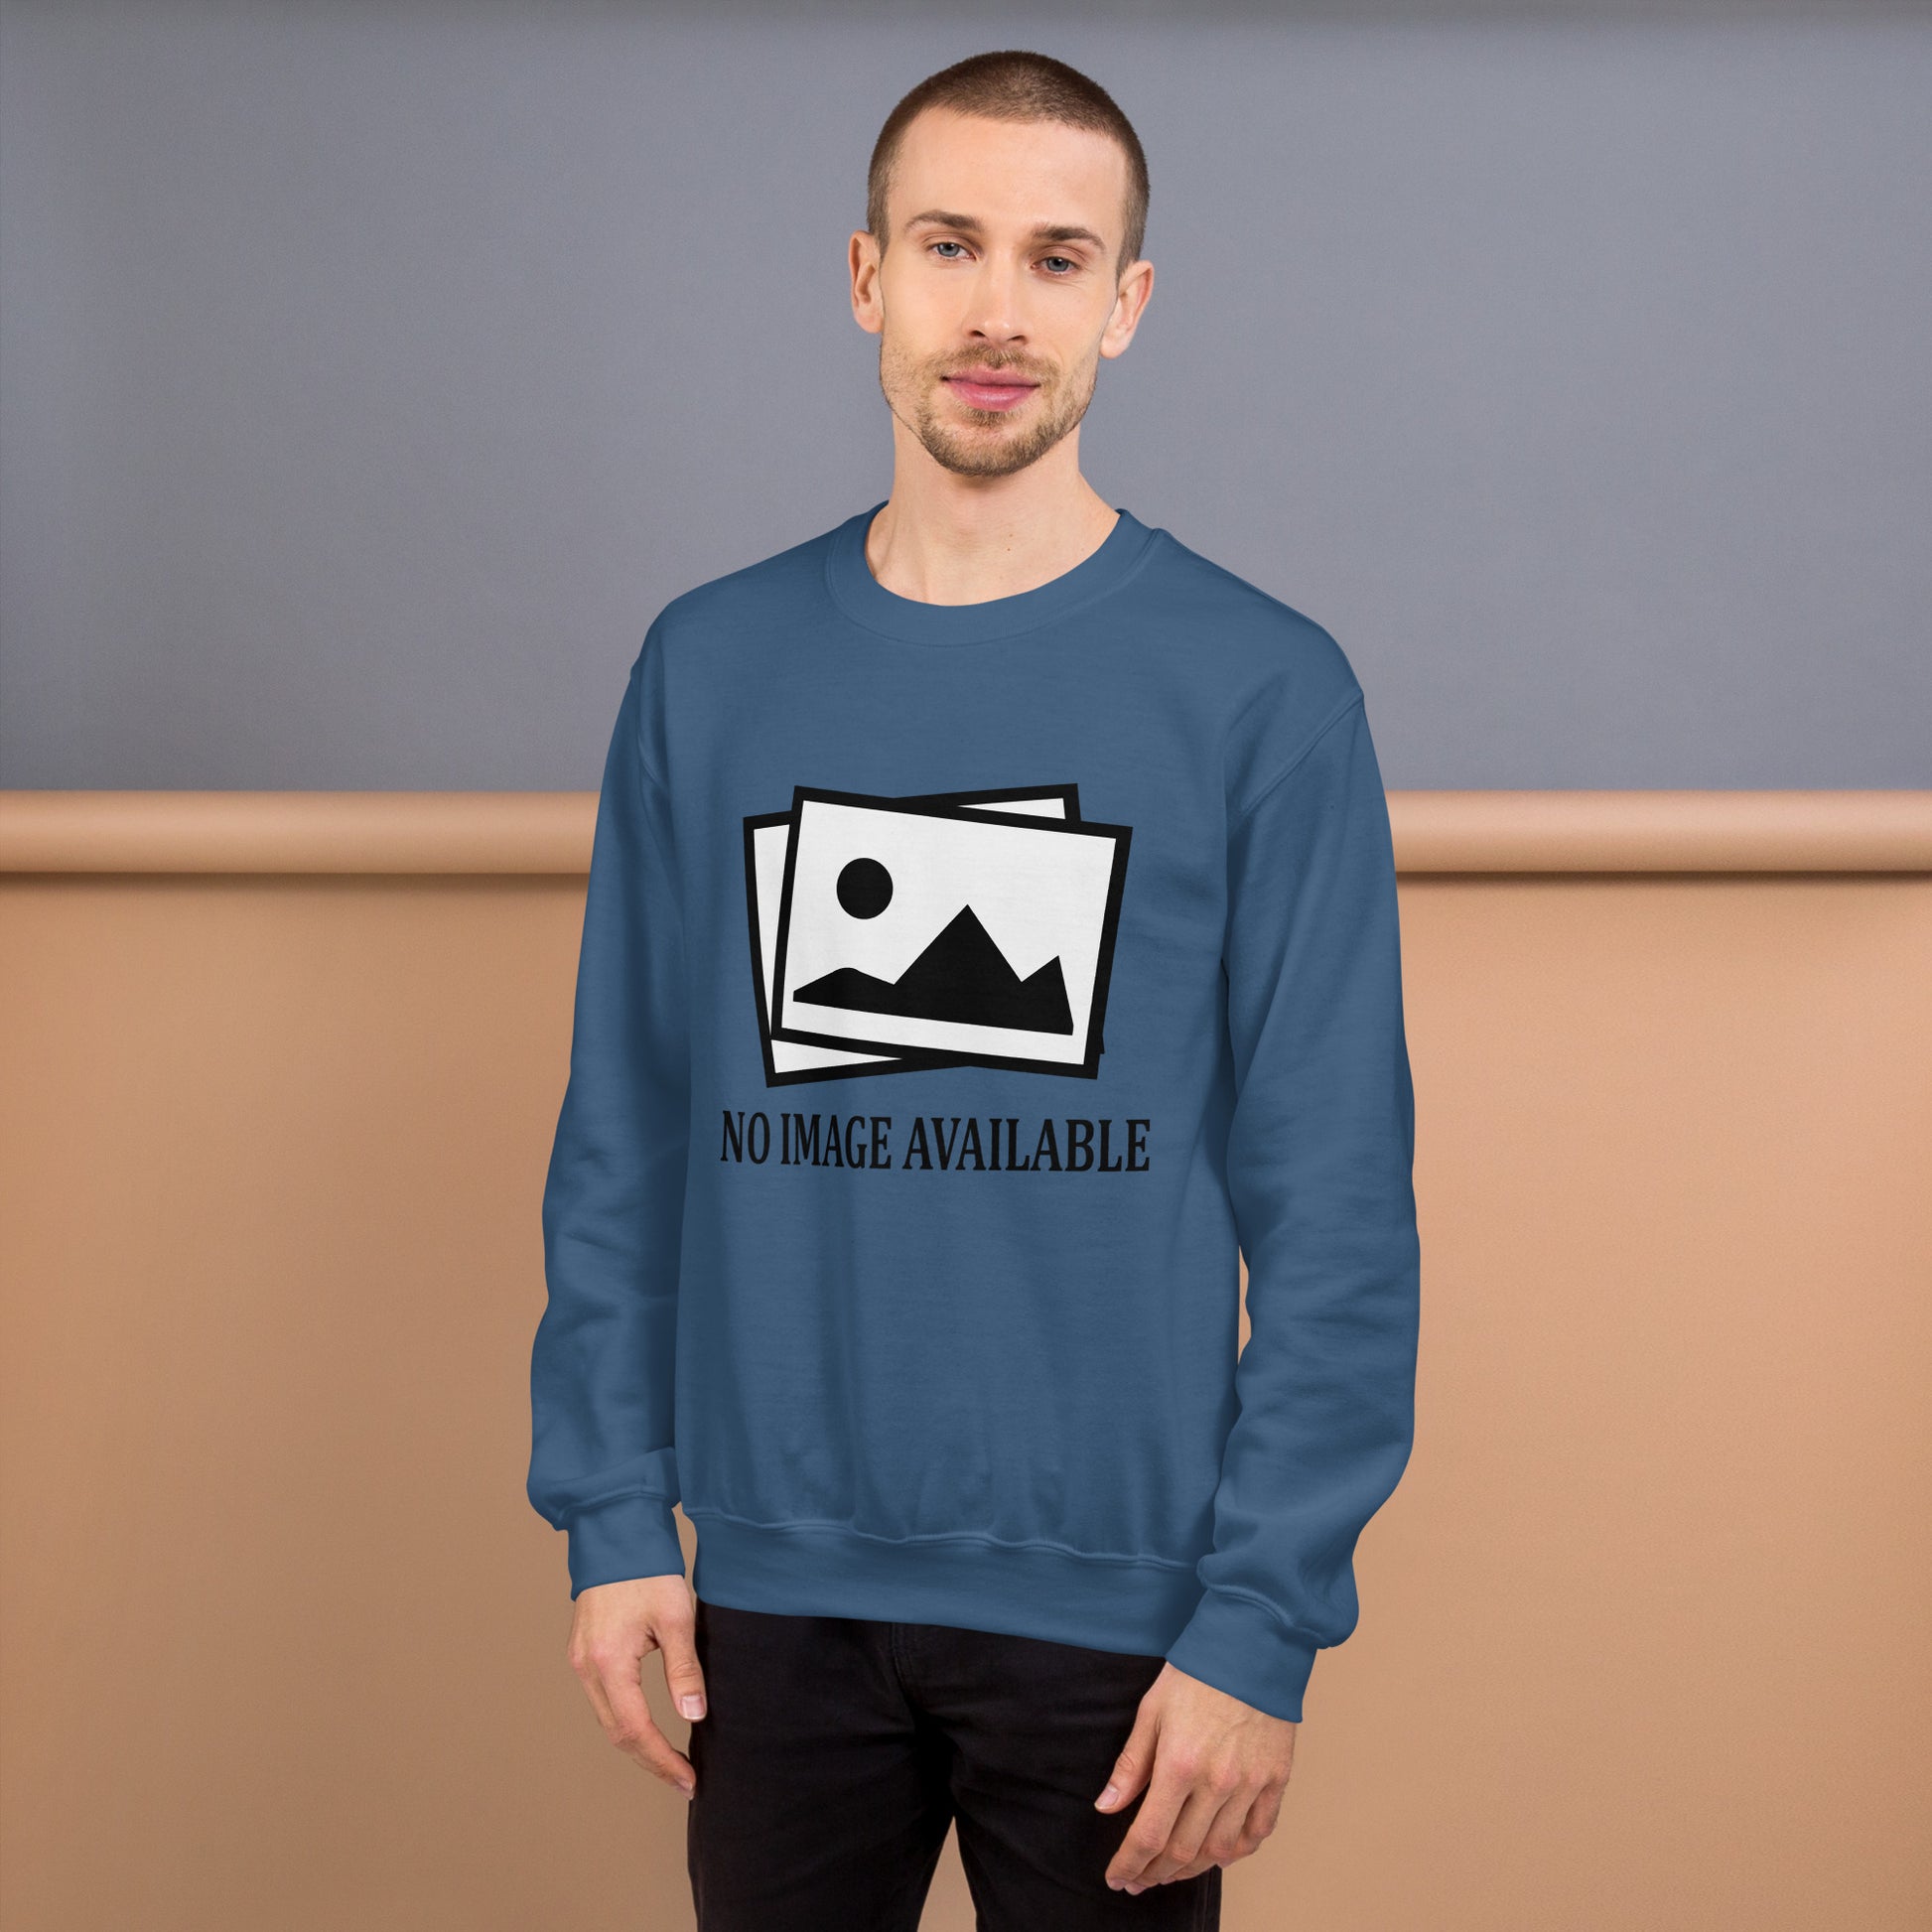 Men with indigo blue sweatshirt with image and text "no image available"